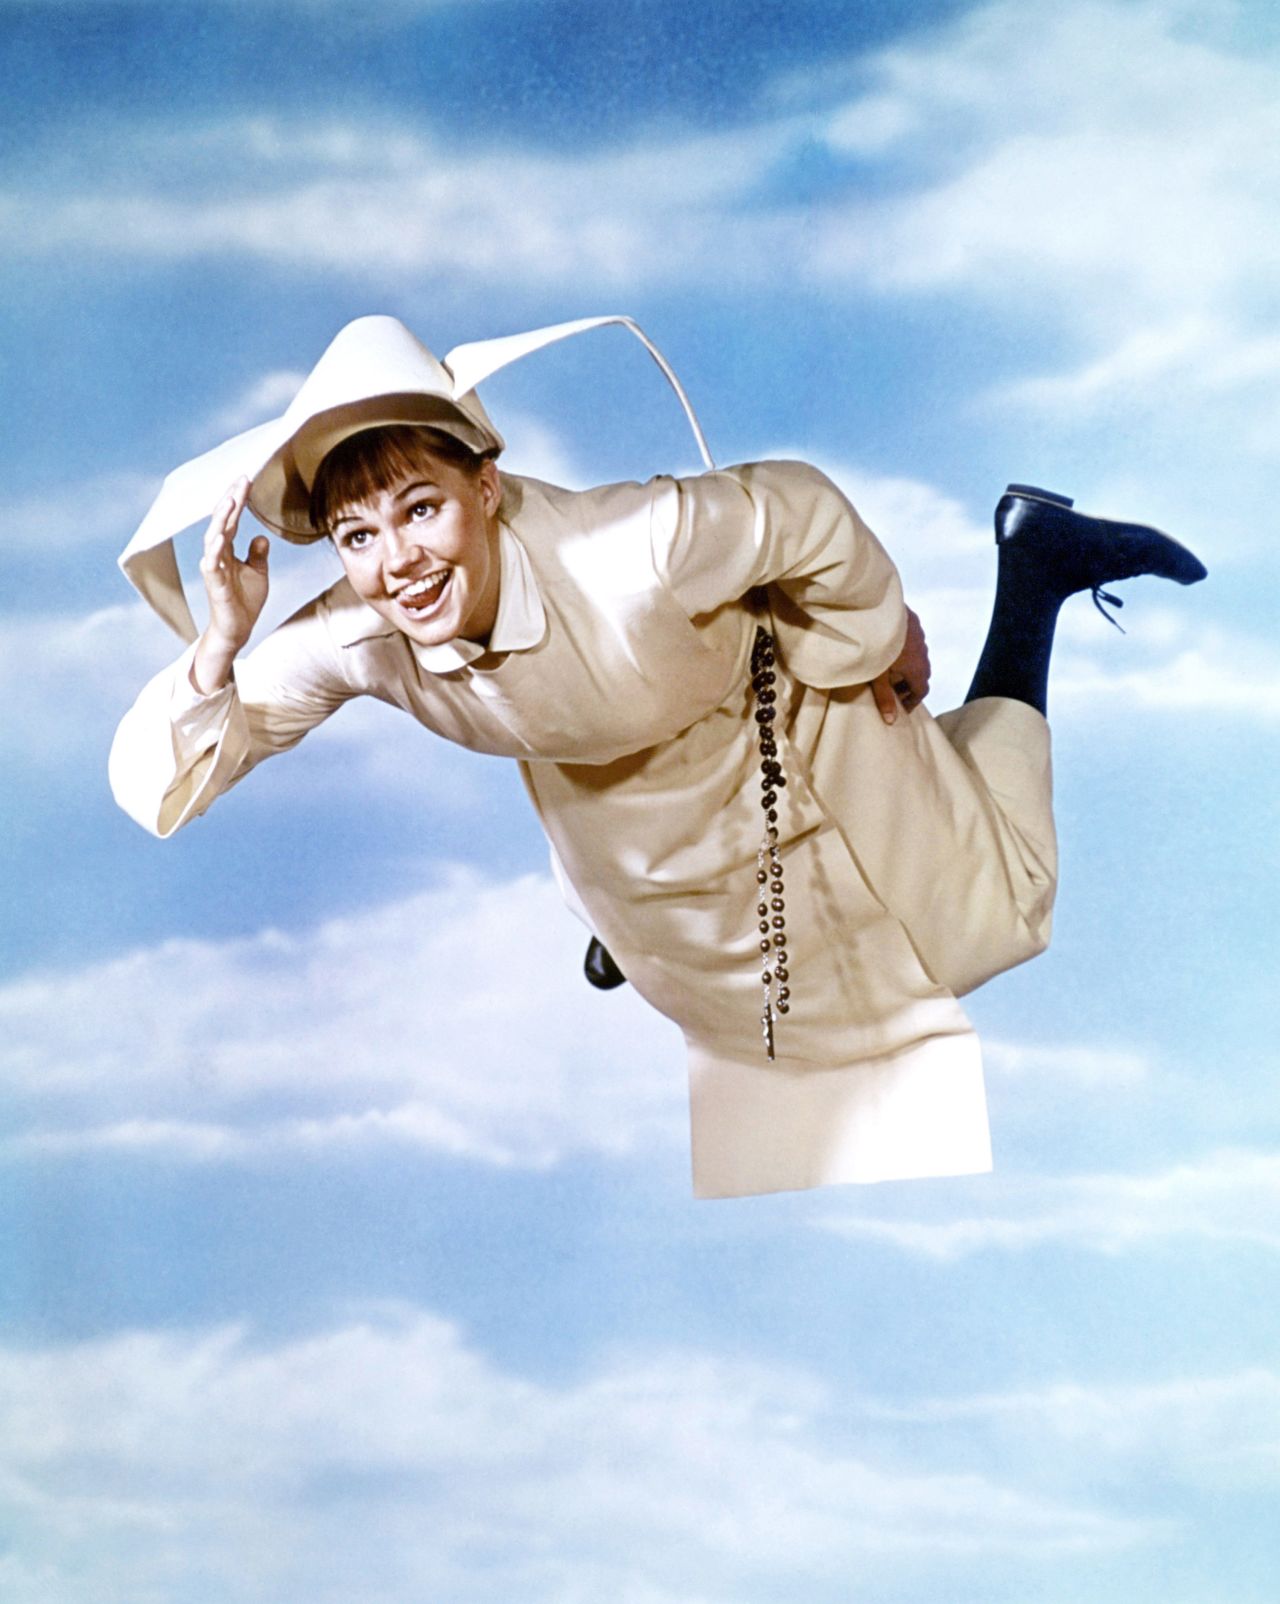 Field starred as Sister Bertrille in the TV sitcom "The Flying Nun" in 1967.